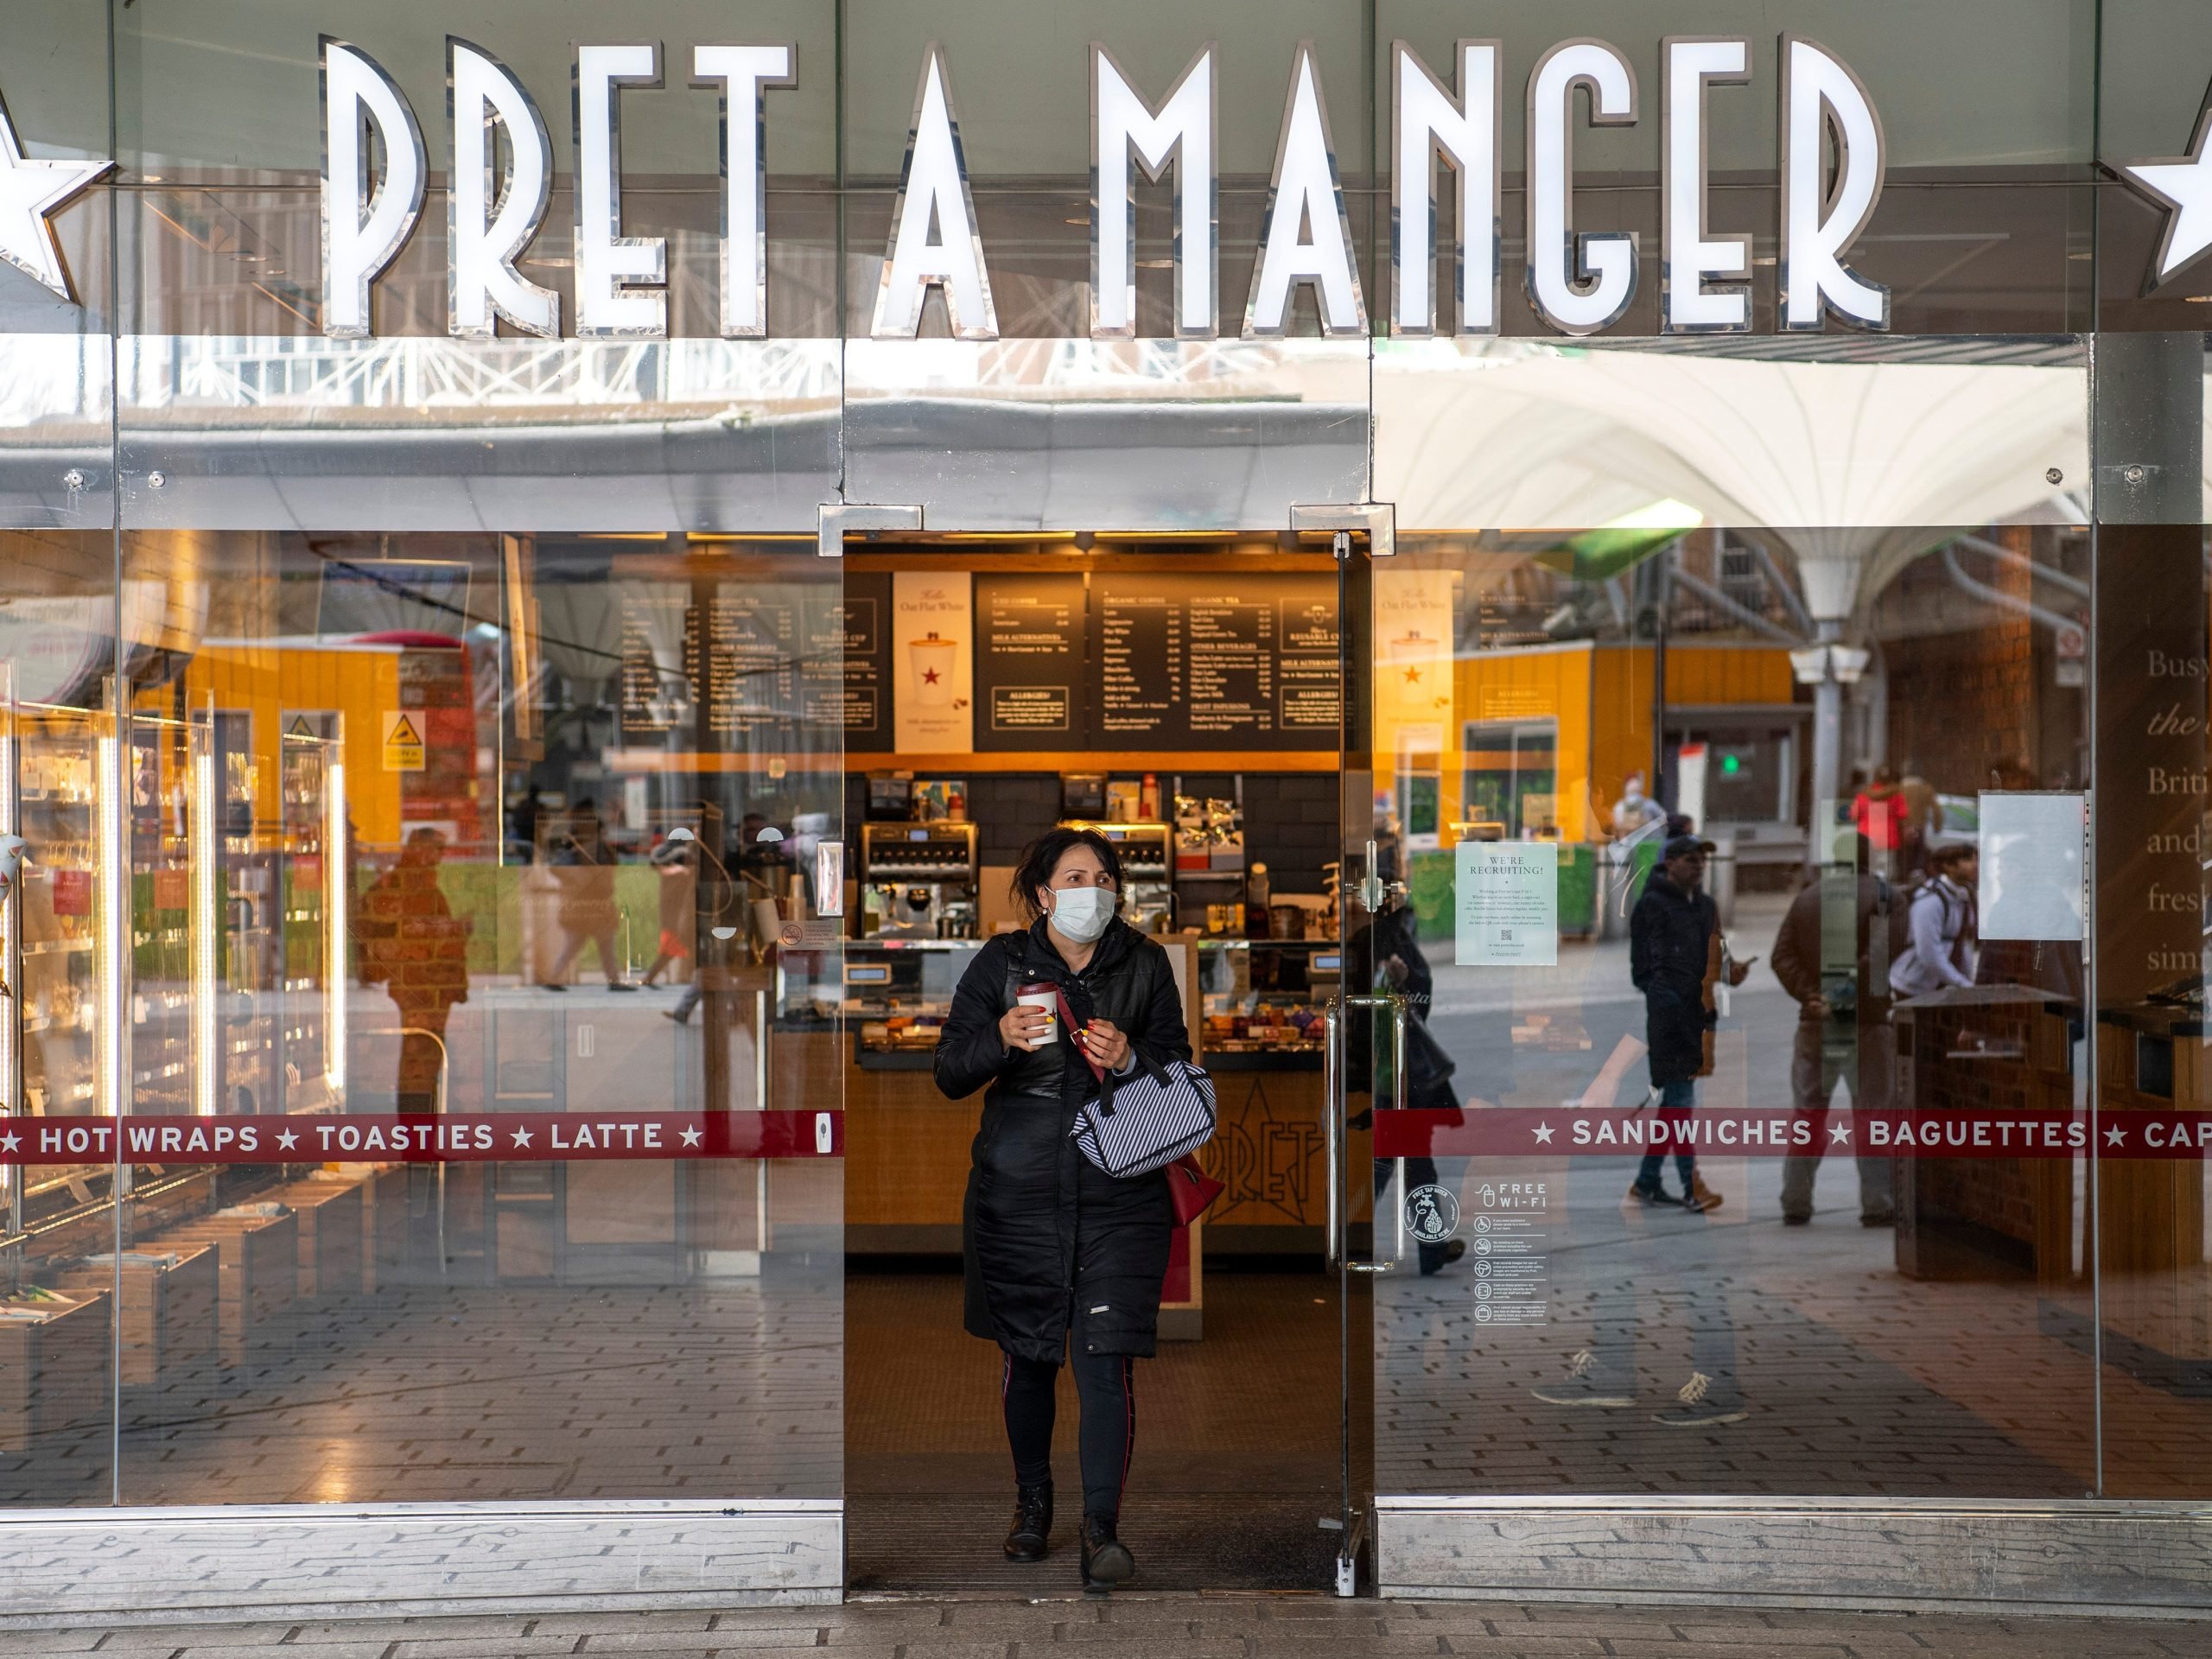 A woman in a protective face mask leaves a Pret A Manger restaurant on March 18, 2020 in London, England.